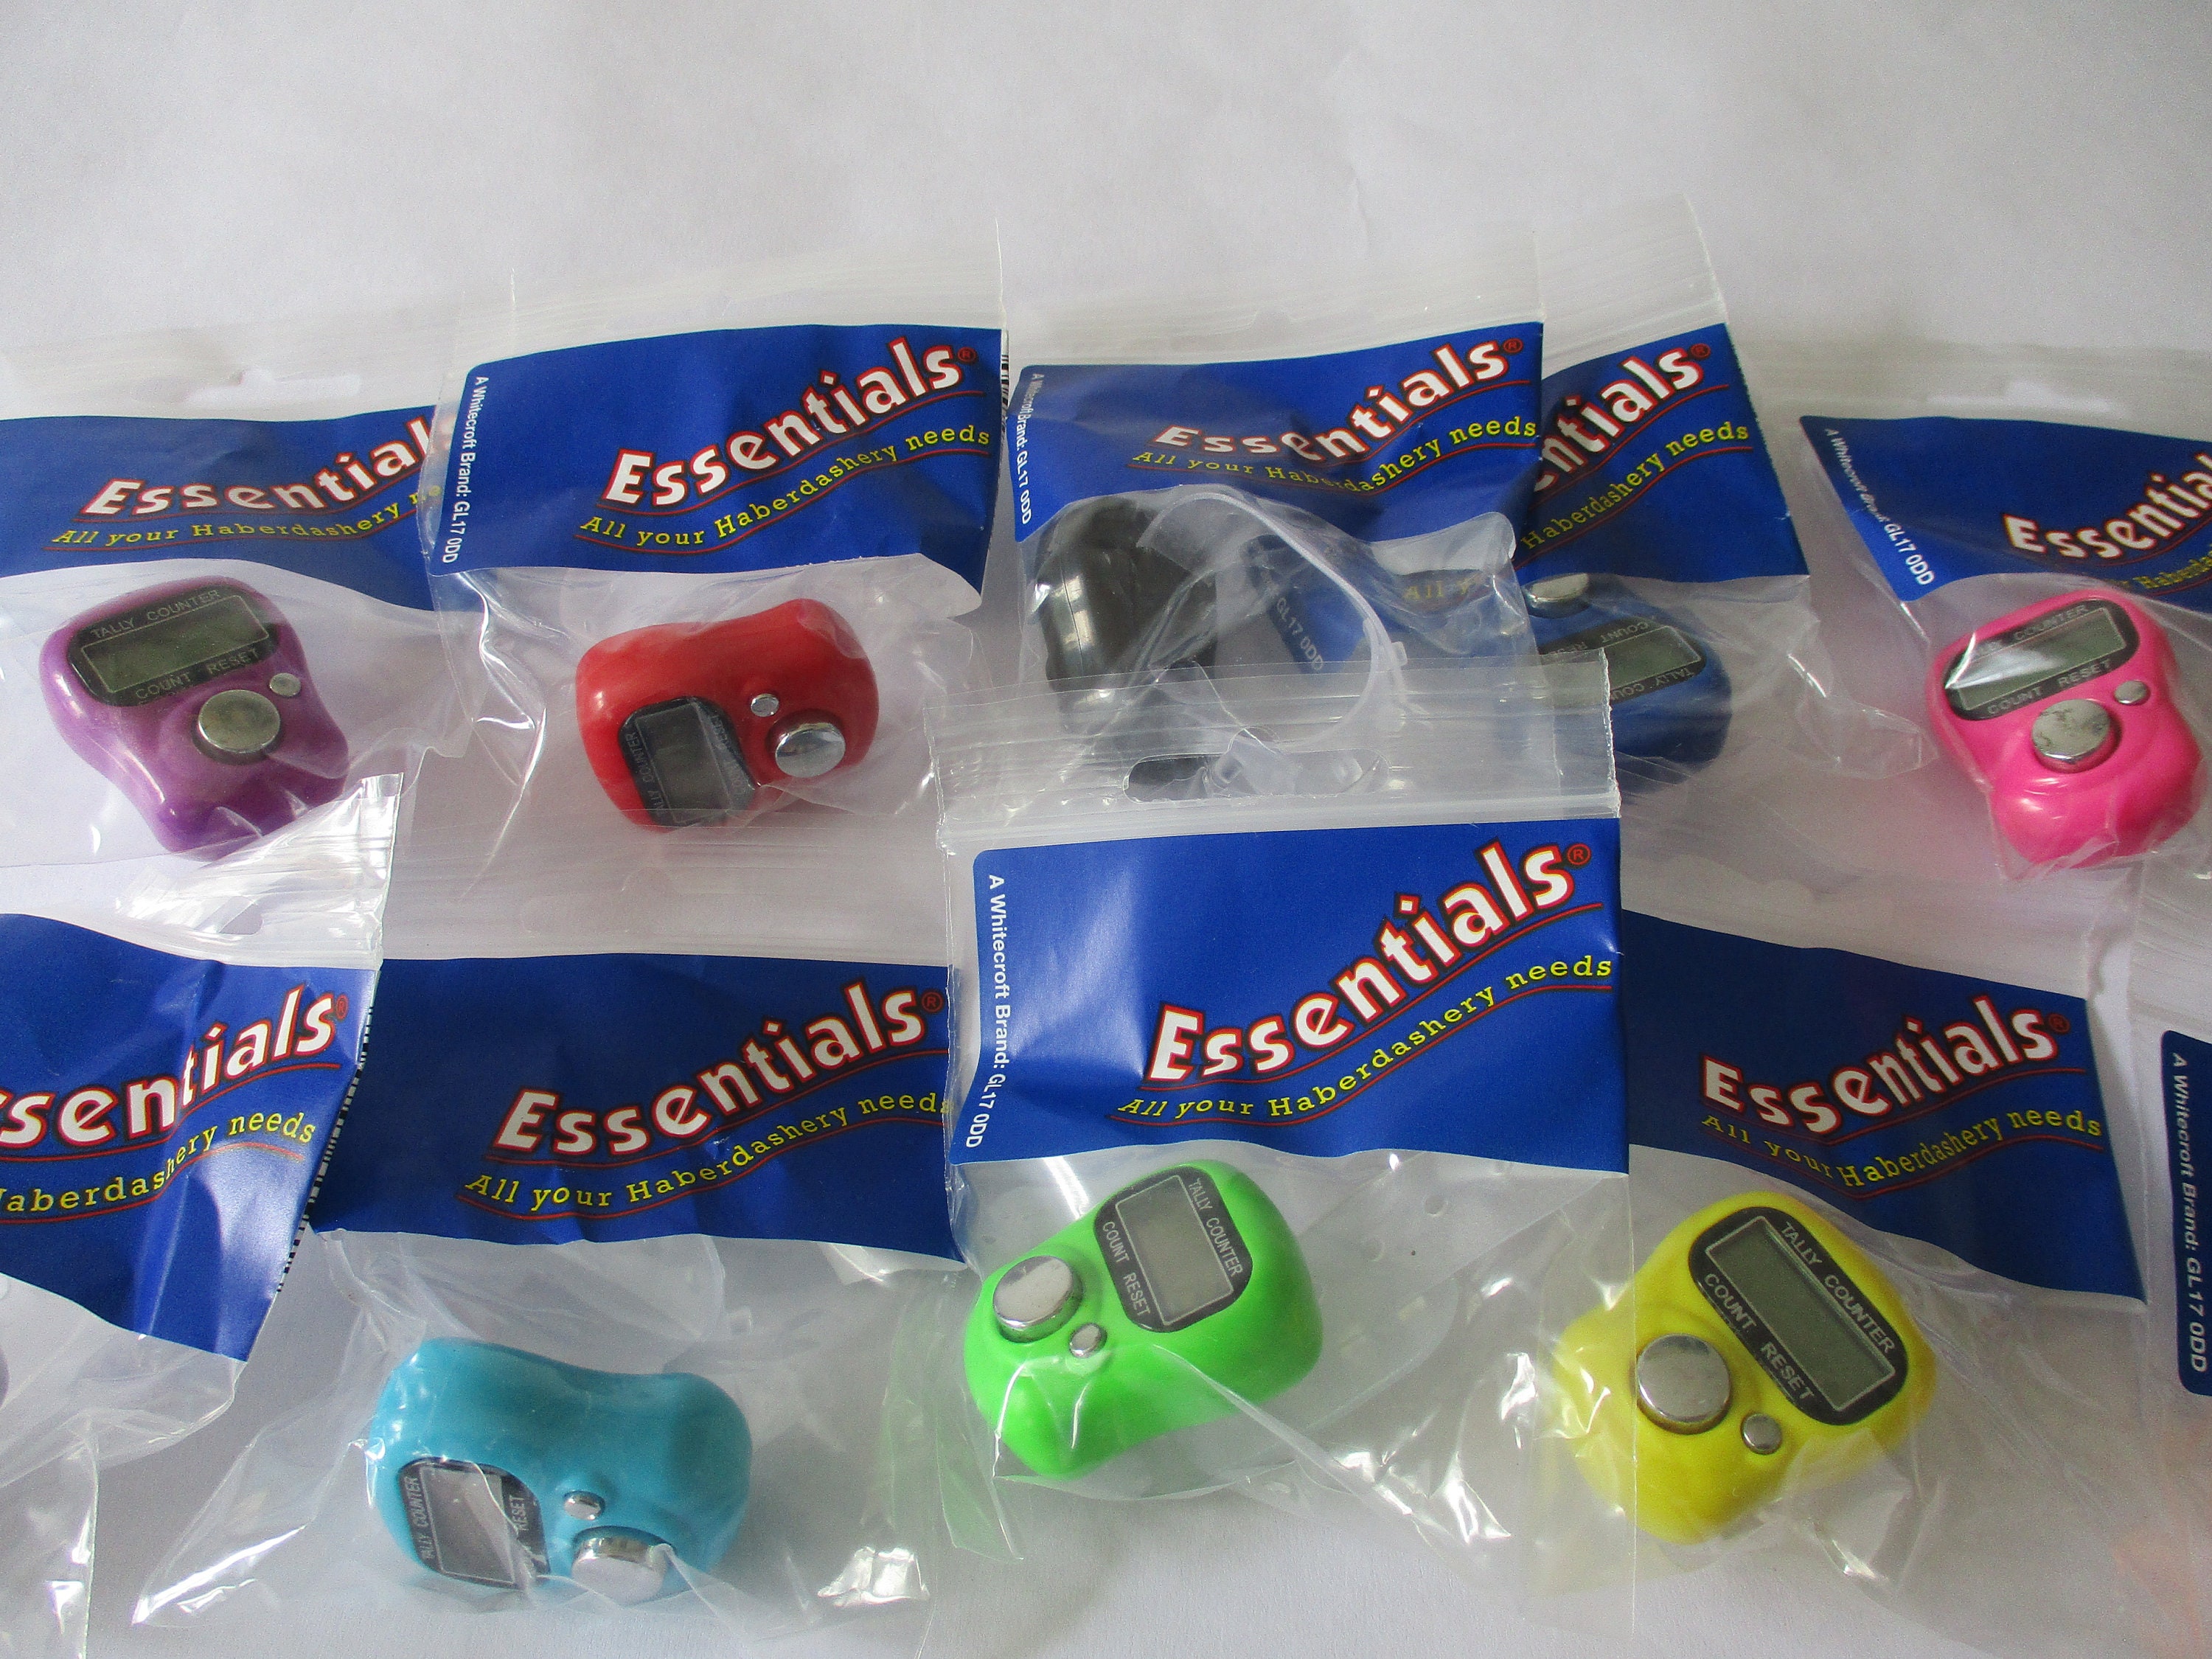 10 Stitch Counters, BULK Digital Row Counter for Crochet and